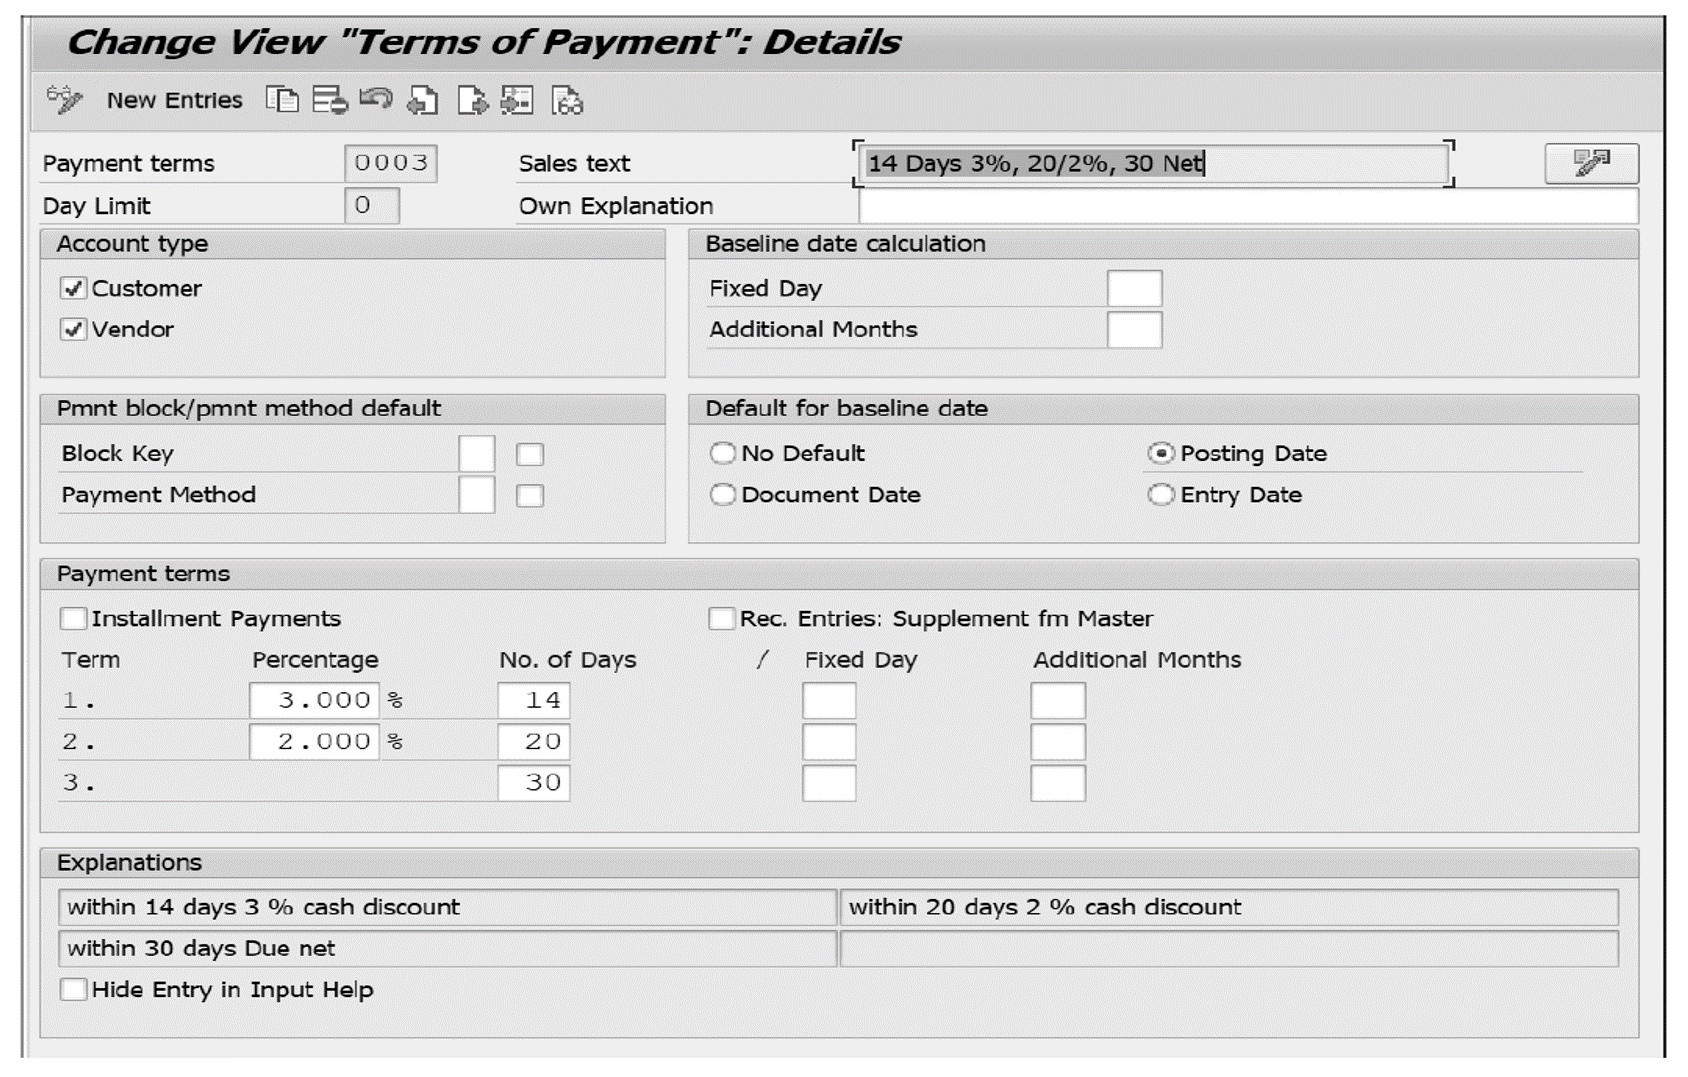 Configuring a Payment Term